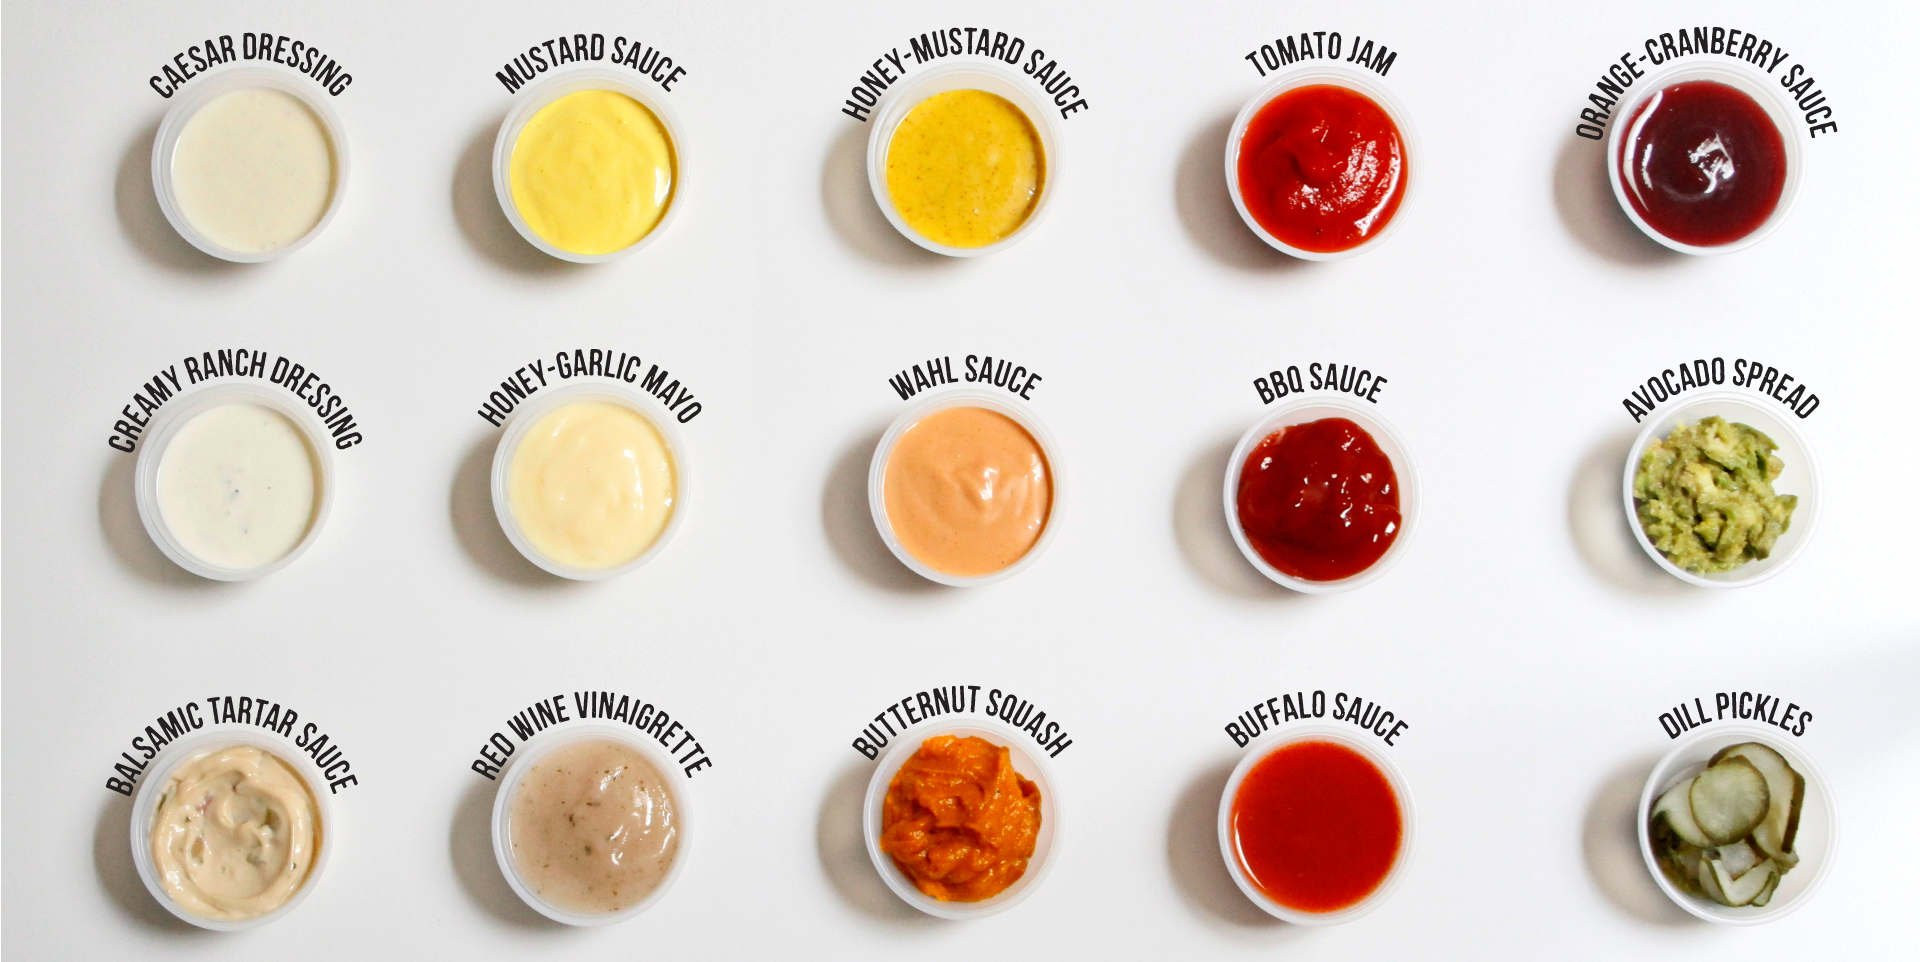 Best 30 List Of Sauces and Condiments - Best Recipes Ideas and Collections